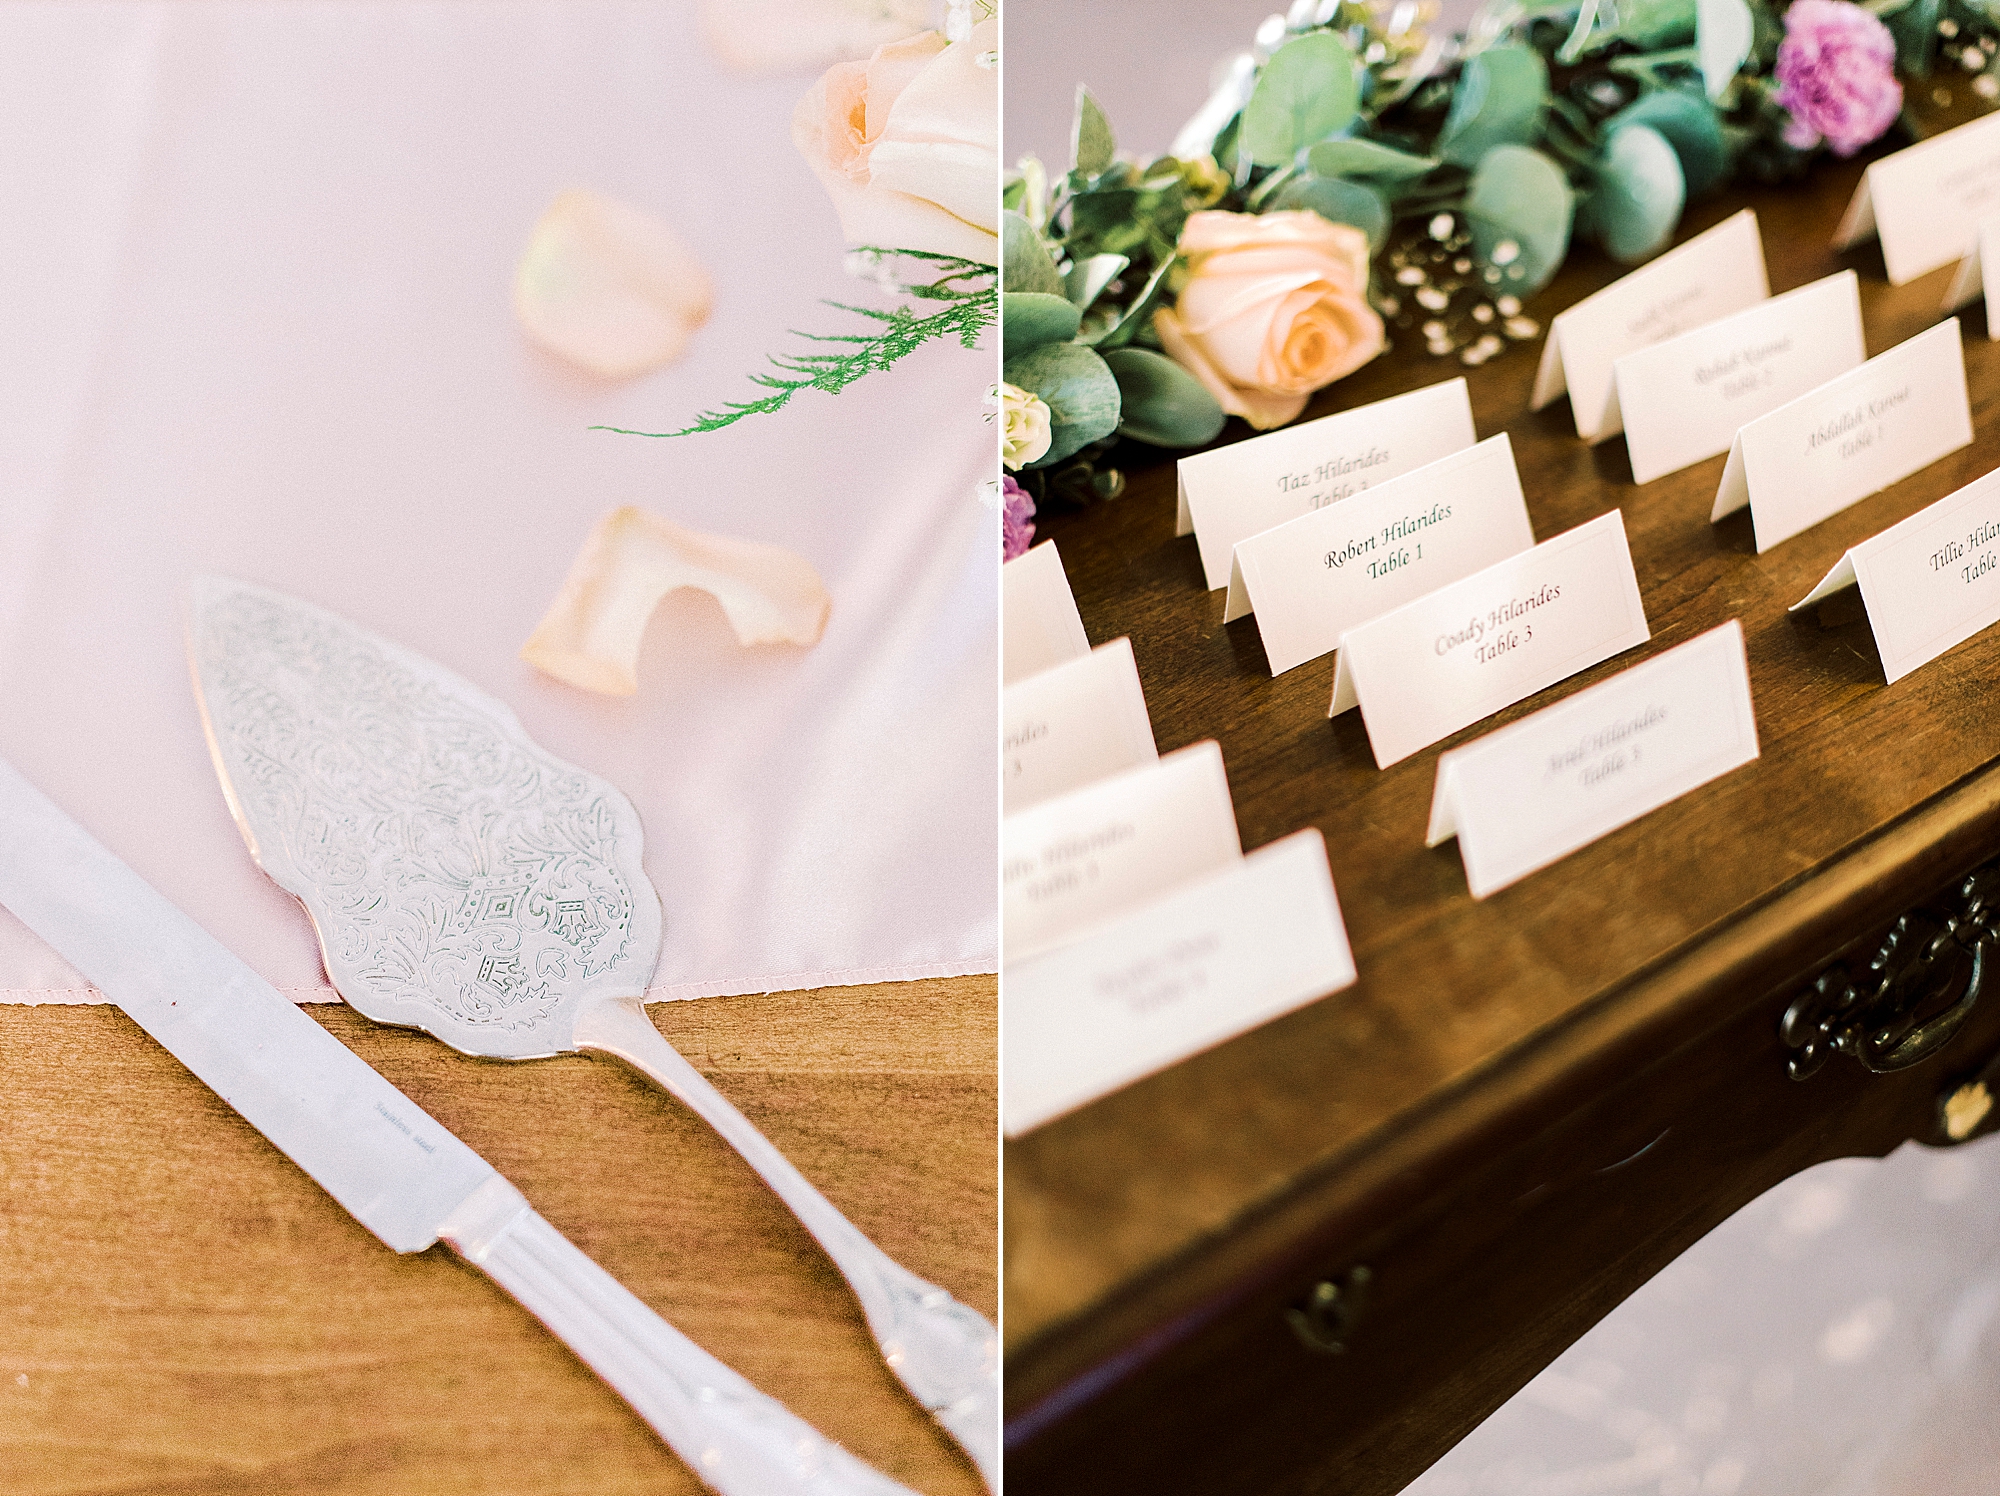 cake cutting tools and seating cards for NC wedding reception